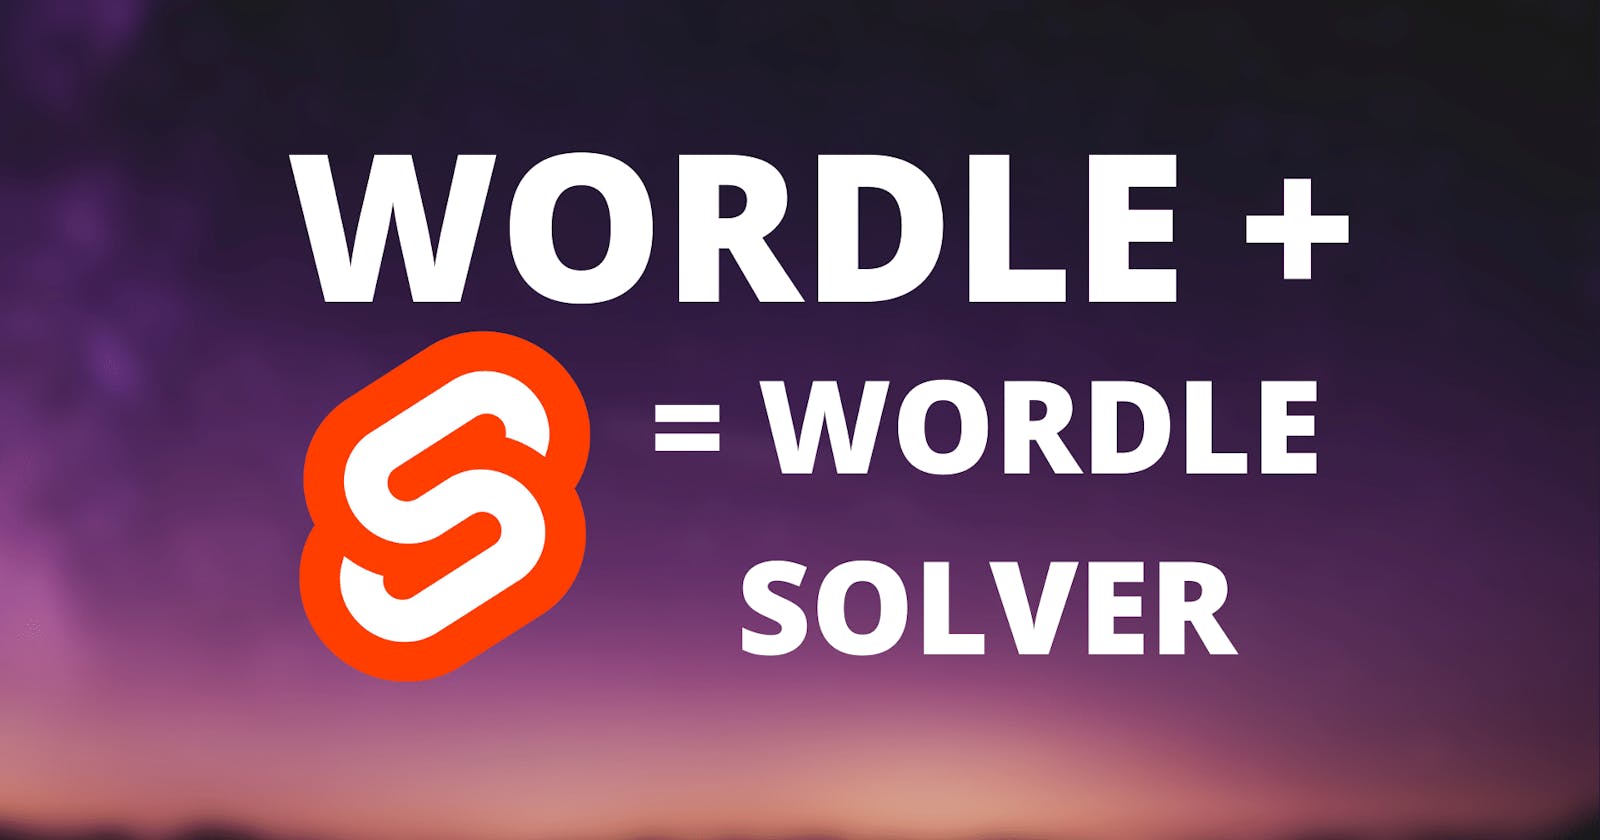 We built a Wordle Solver in Svelte - Here is how we did it